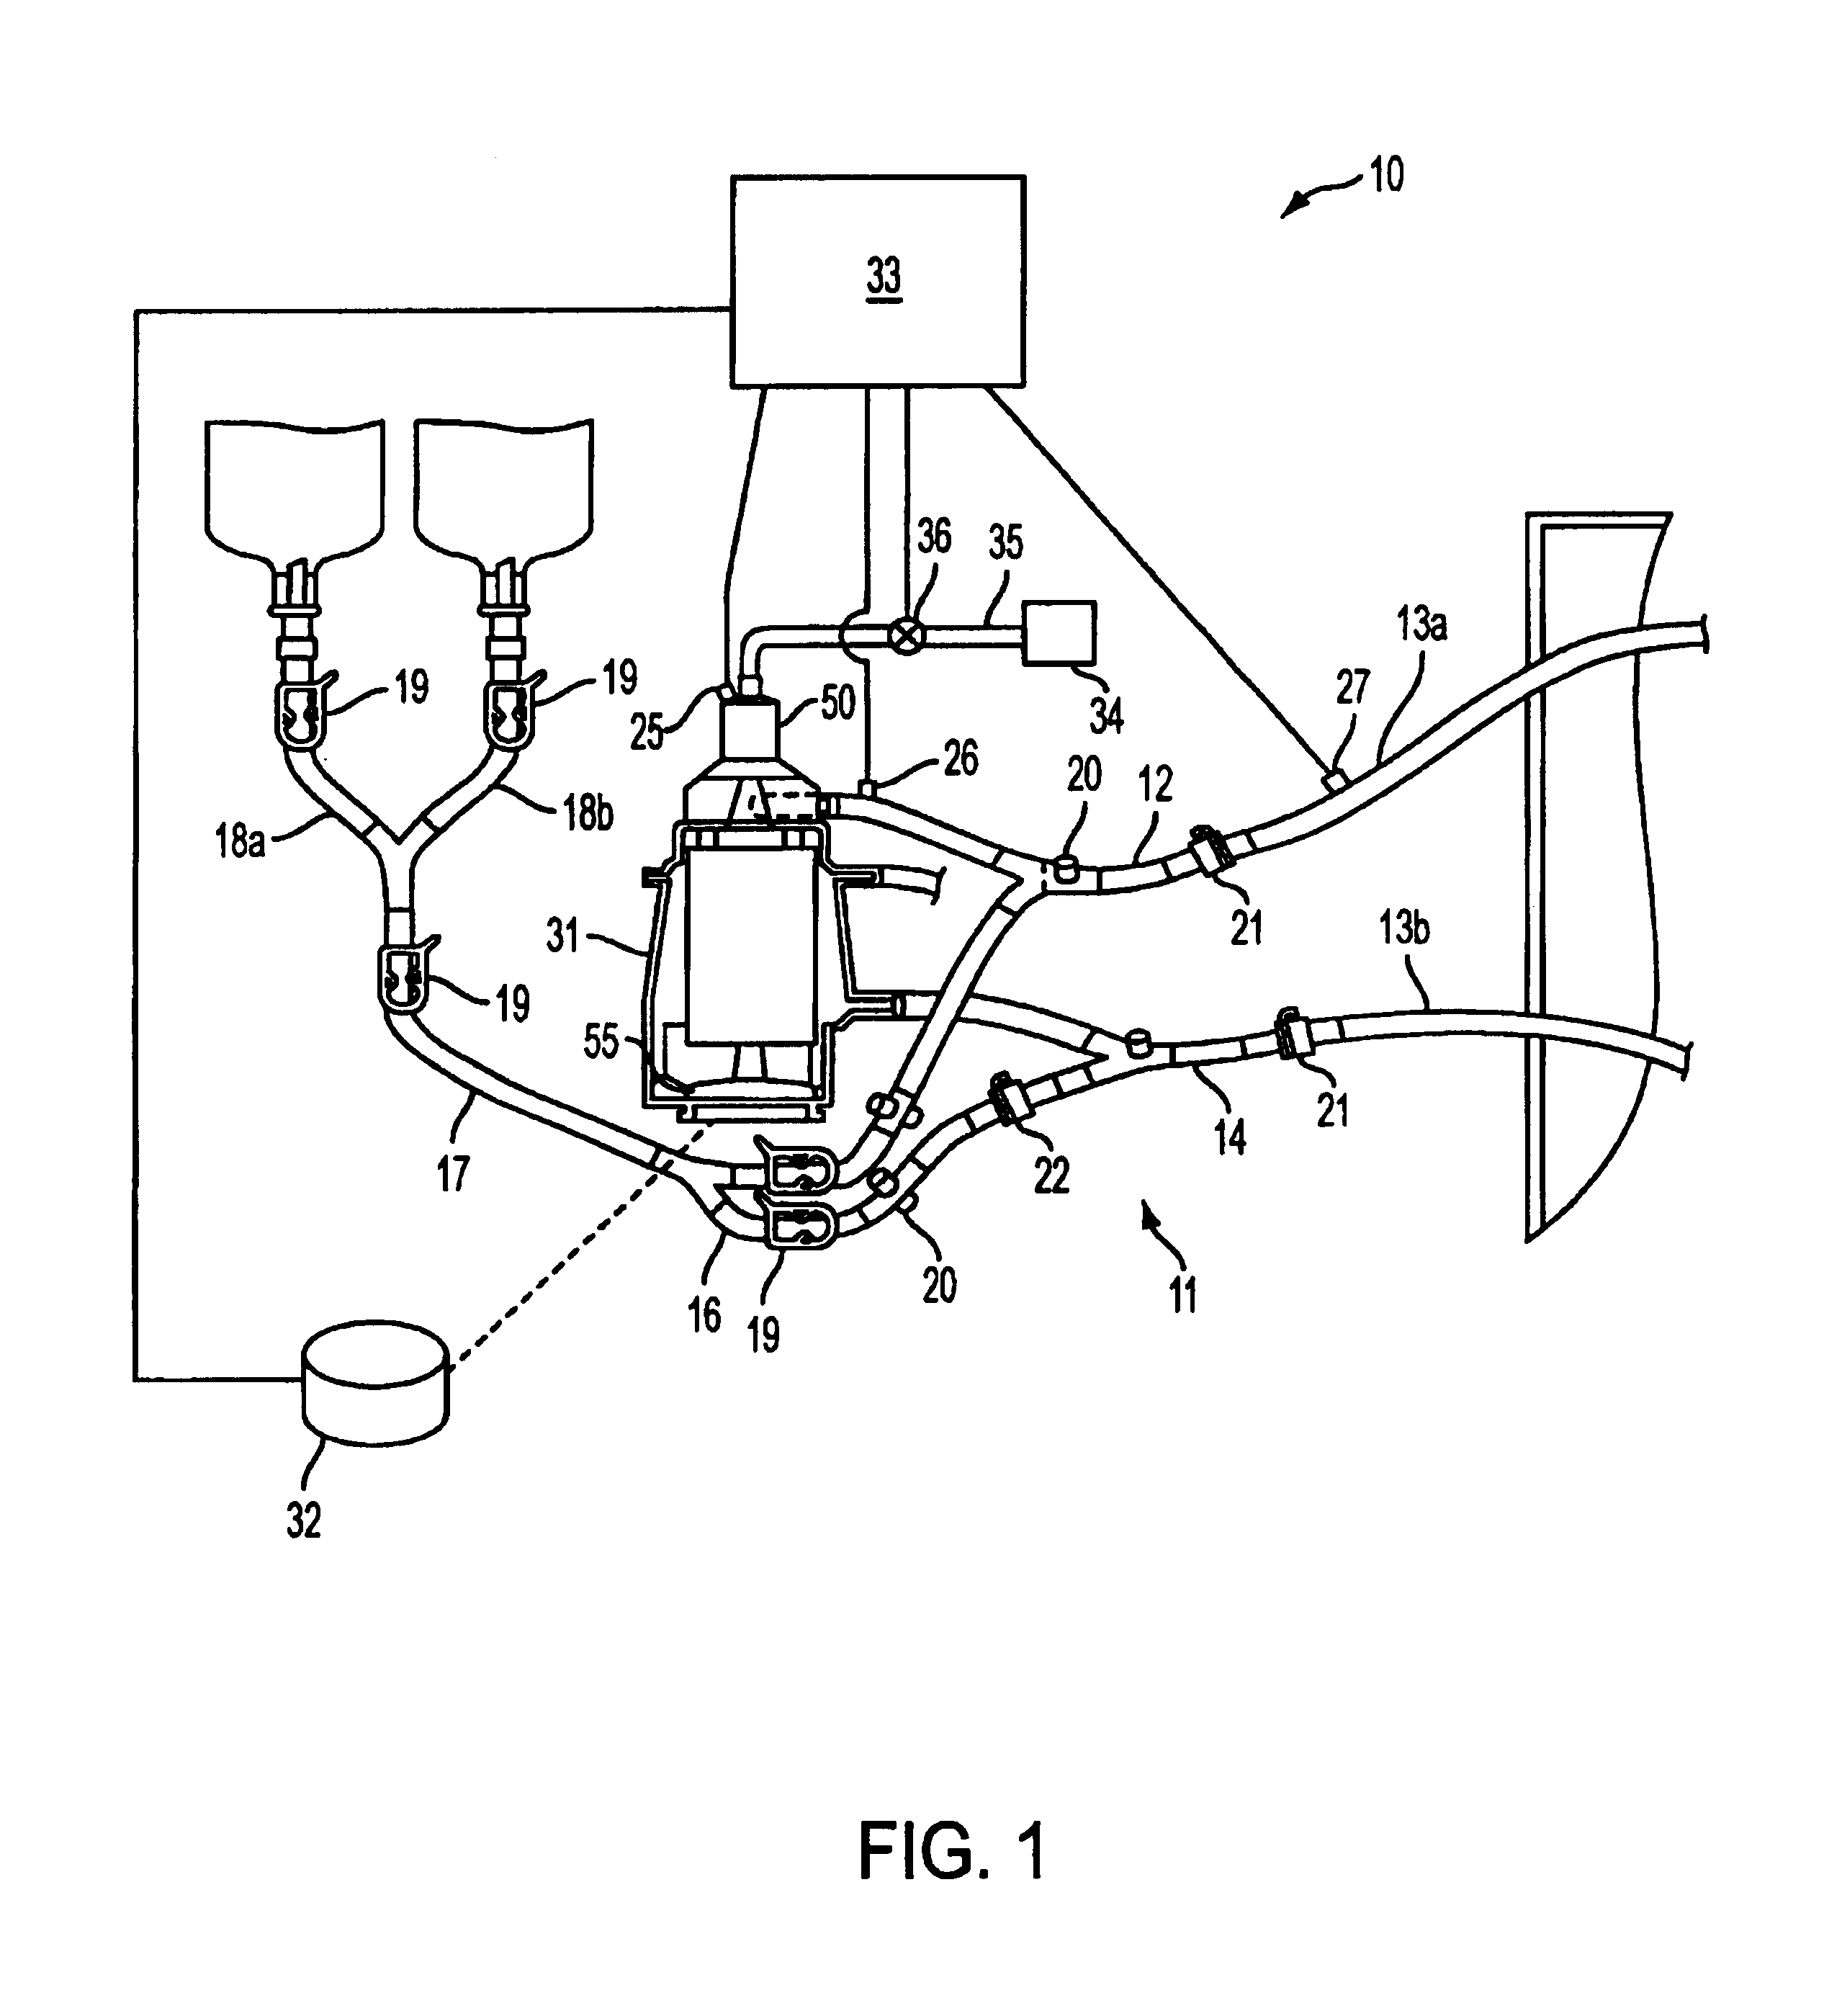 Extracorporeal blood handling system with automatic flow control and methods of use